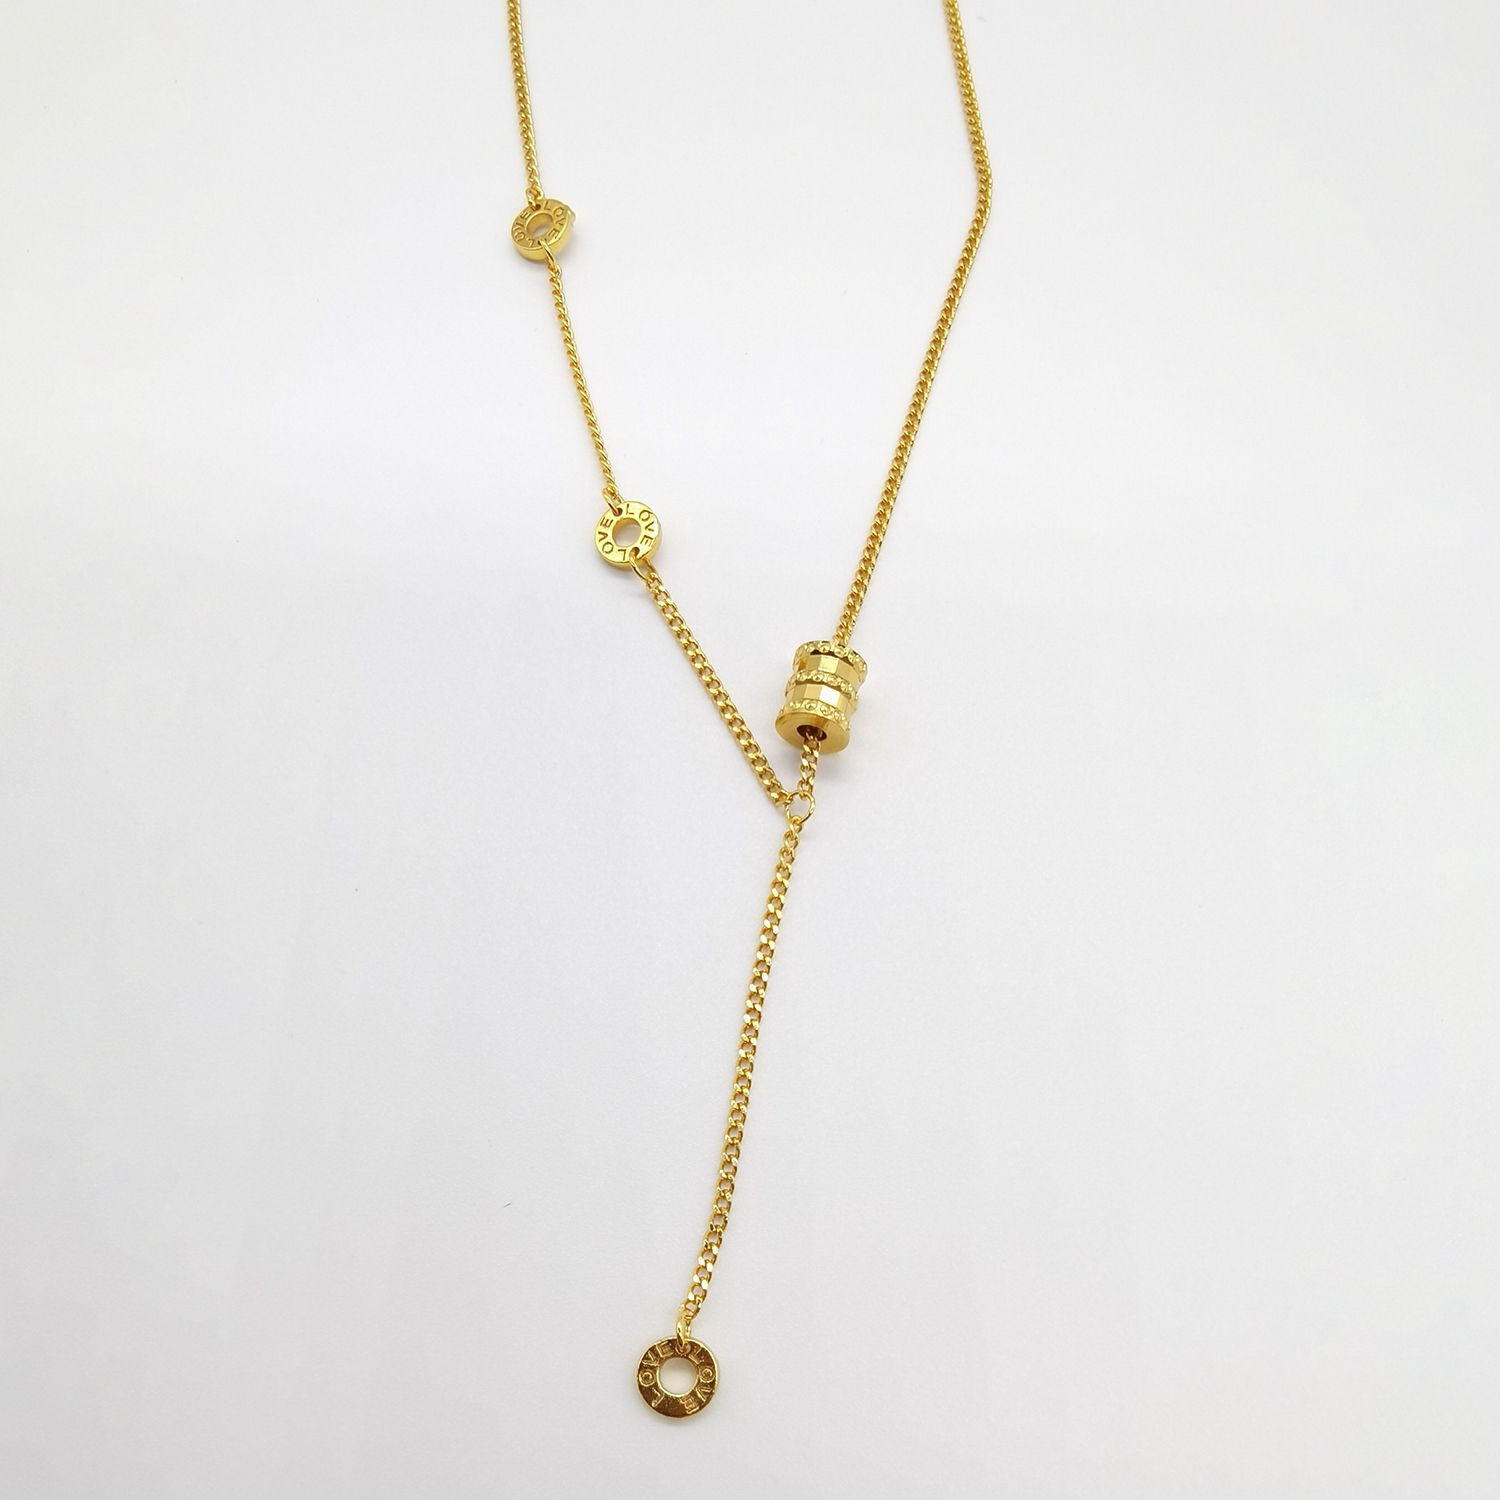 Alluvial gold vacuum electroplating 24K gold small waist necklace